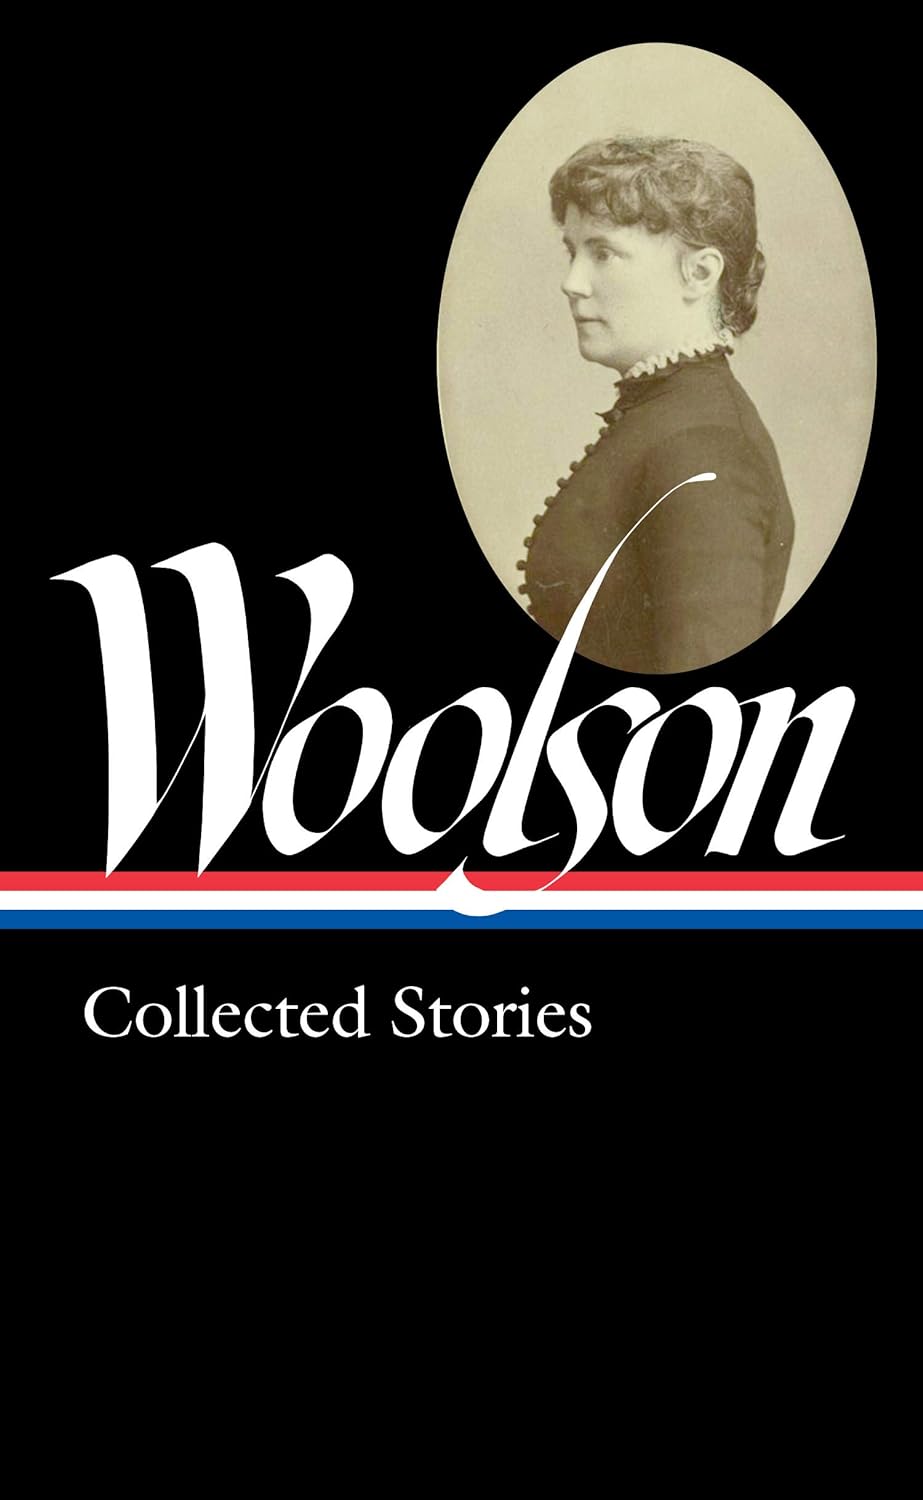 Constance Fenimore Woolson (2020, Library of America, The)